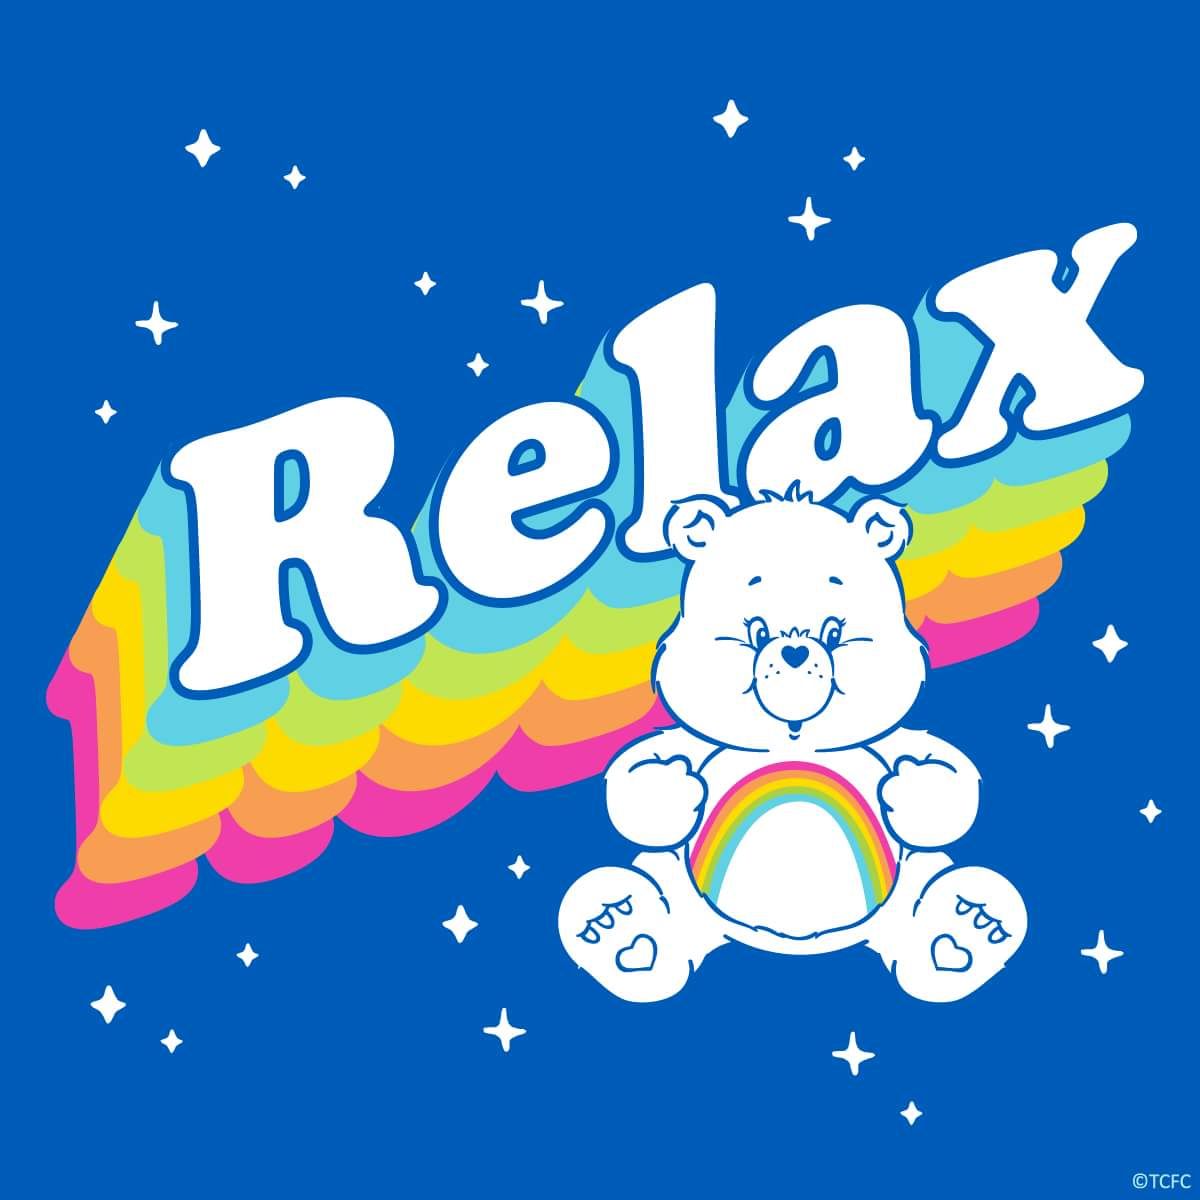 Relax with cheer. Care bears, Cyberpunk aesthetic